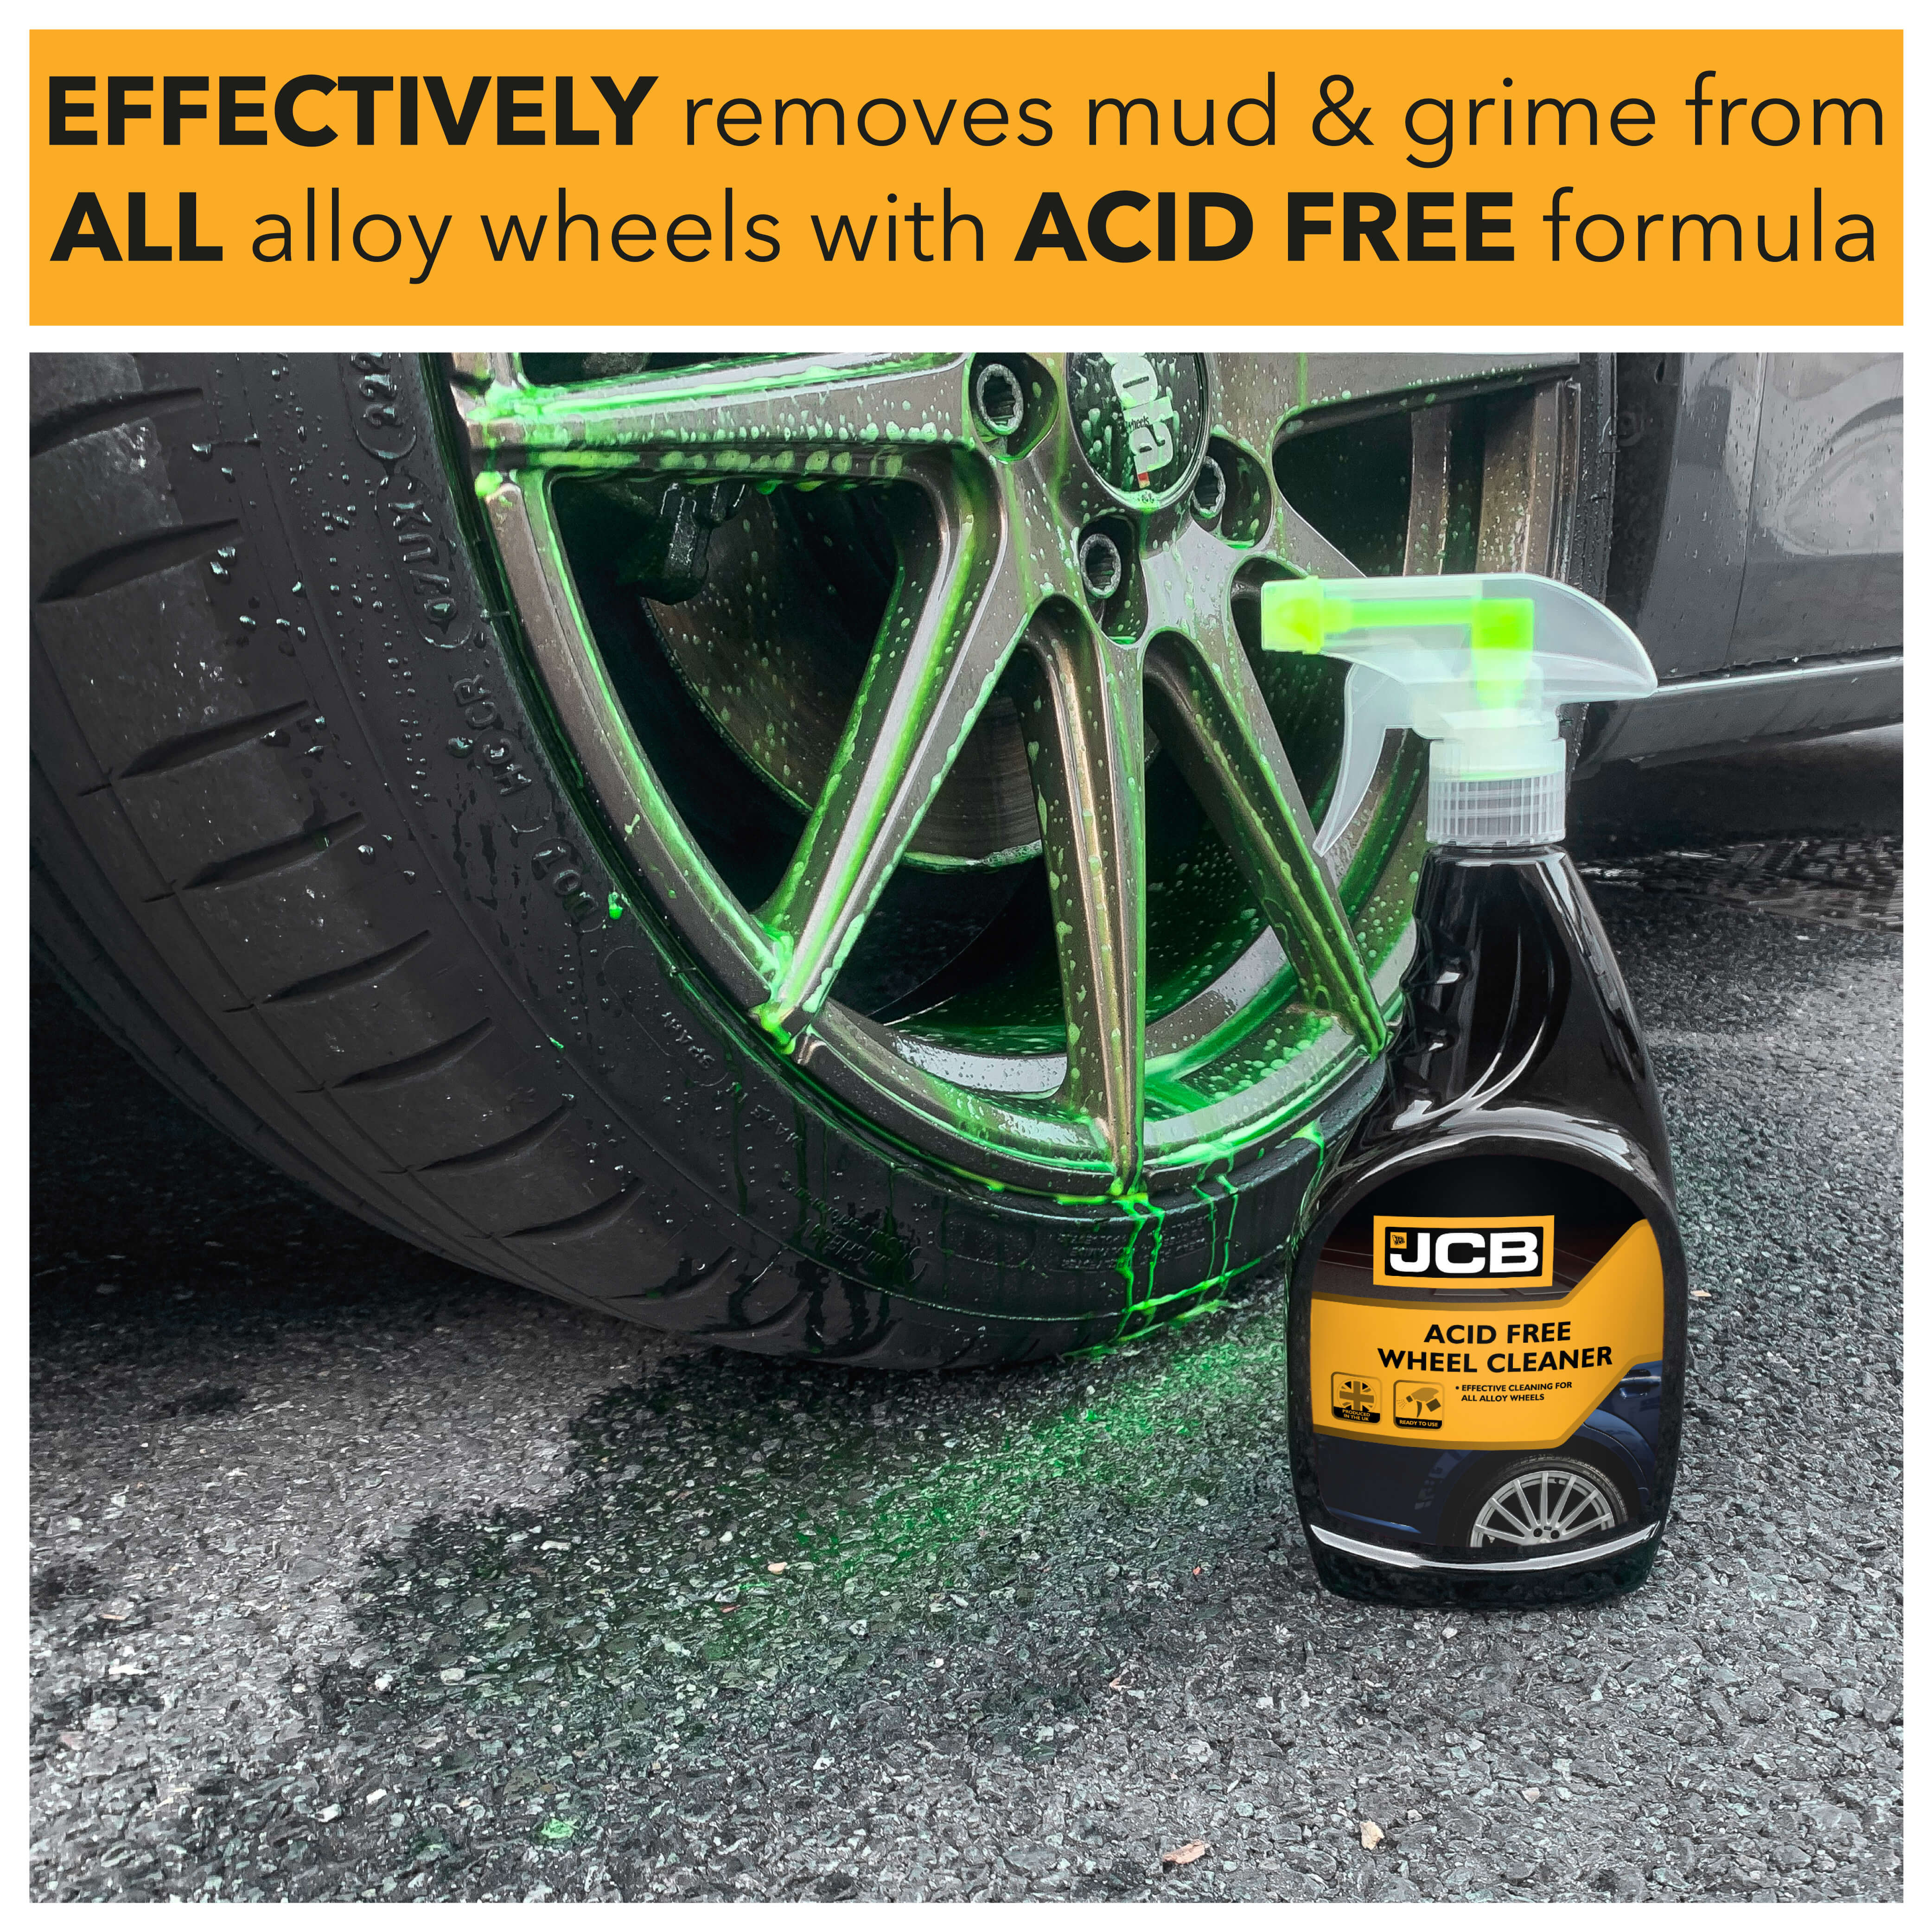 Effectively removes mud & grime from all alloy wheels with acid free formula 